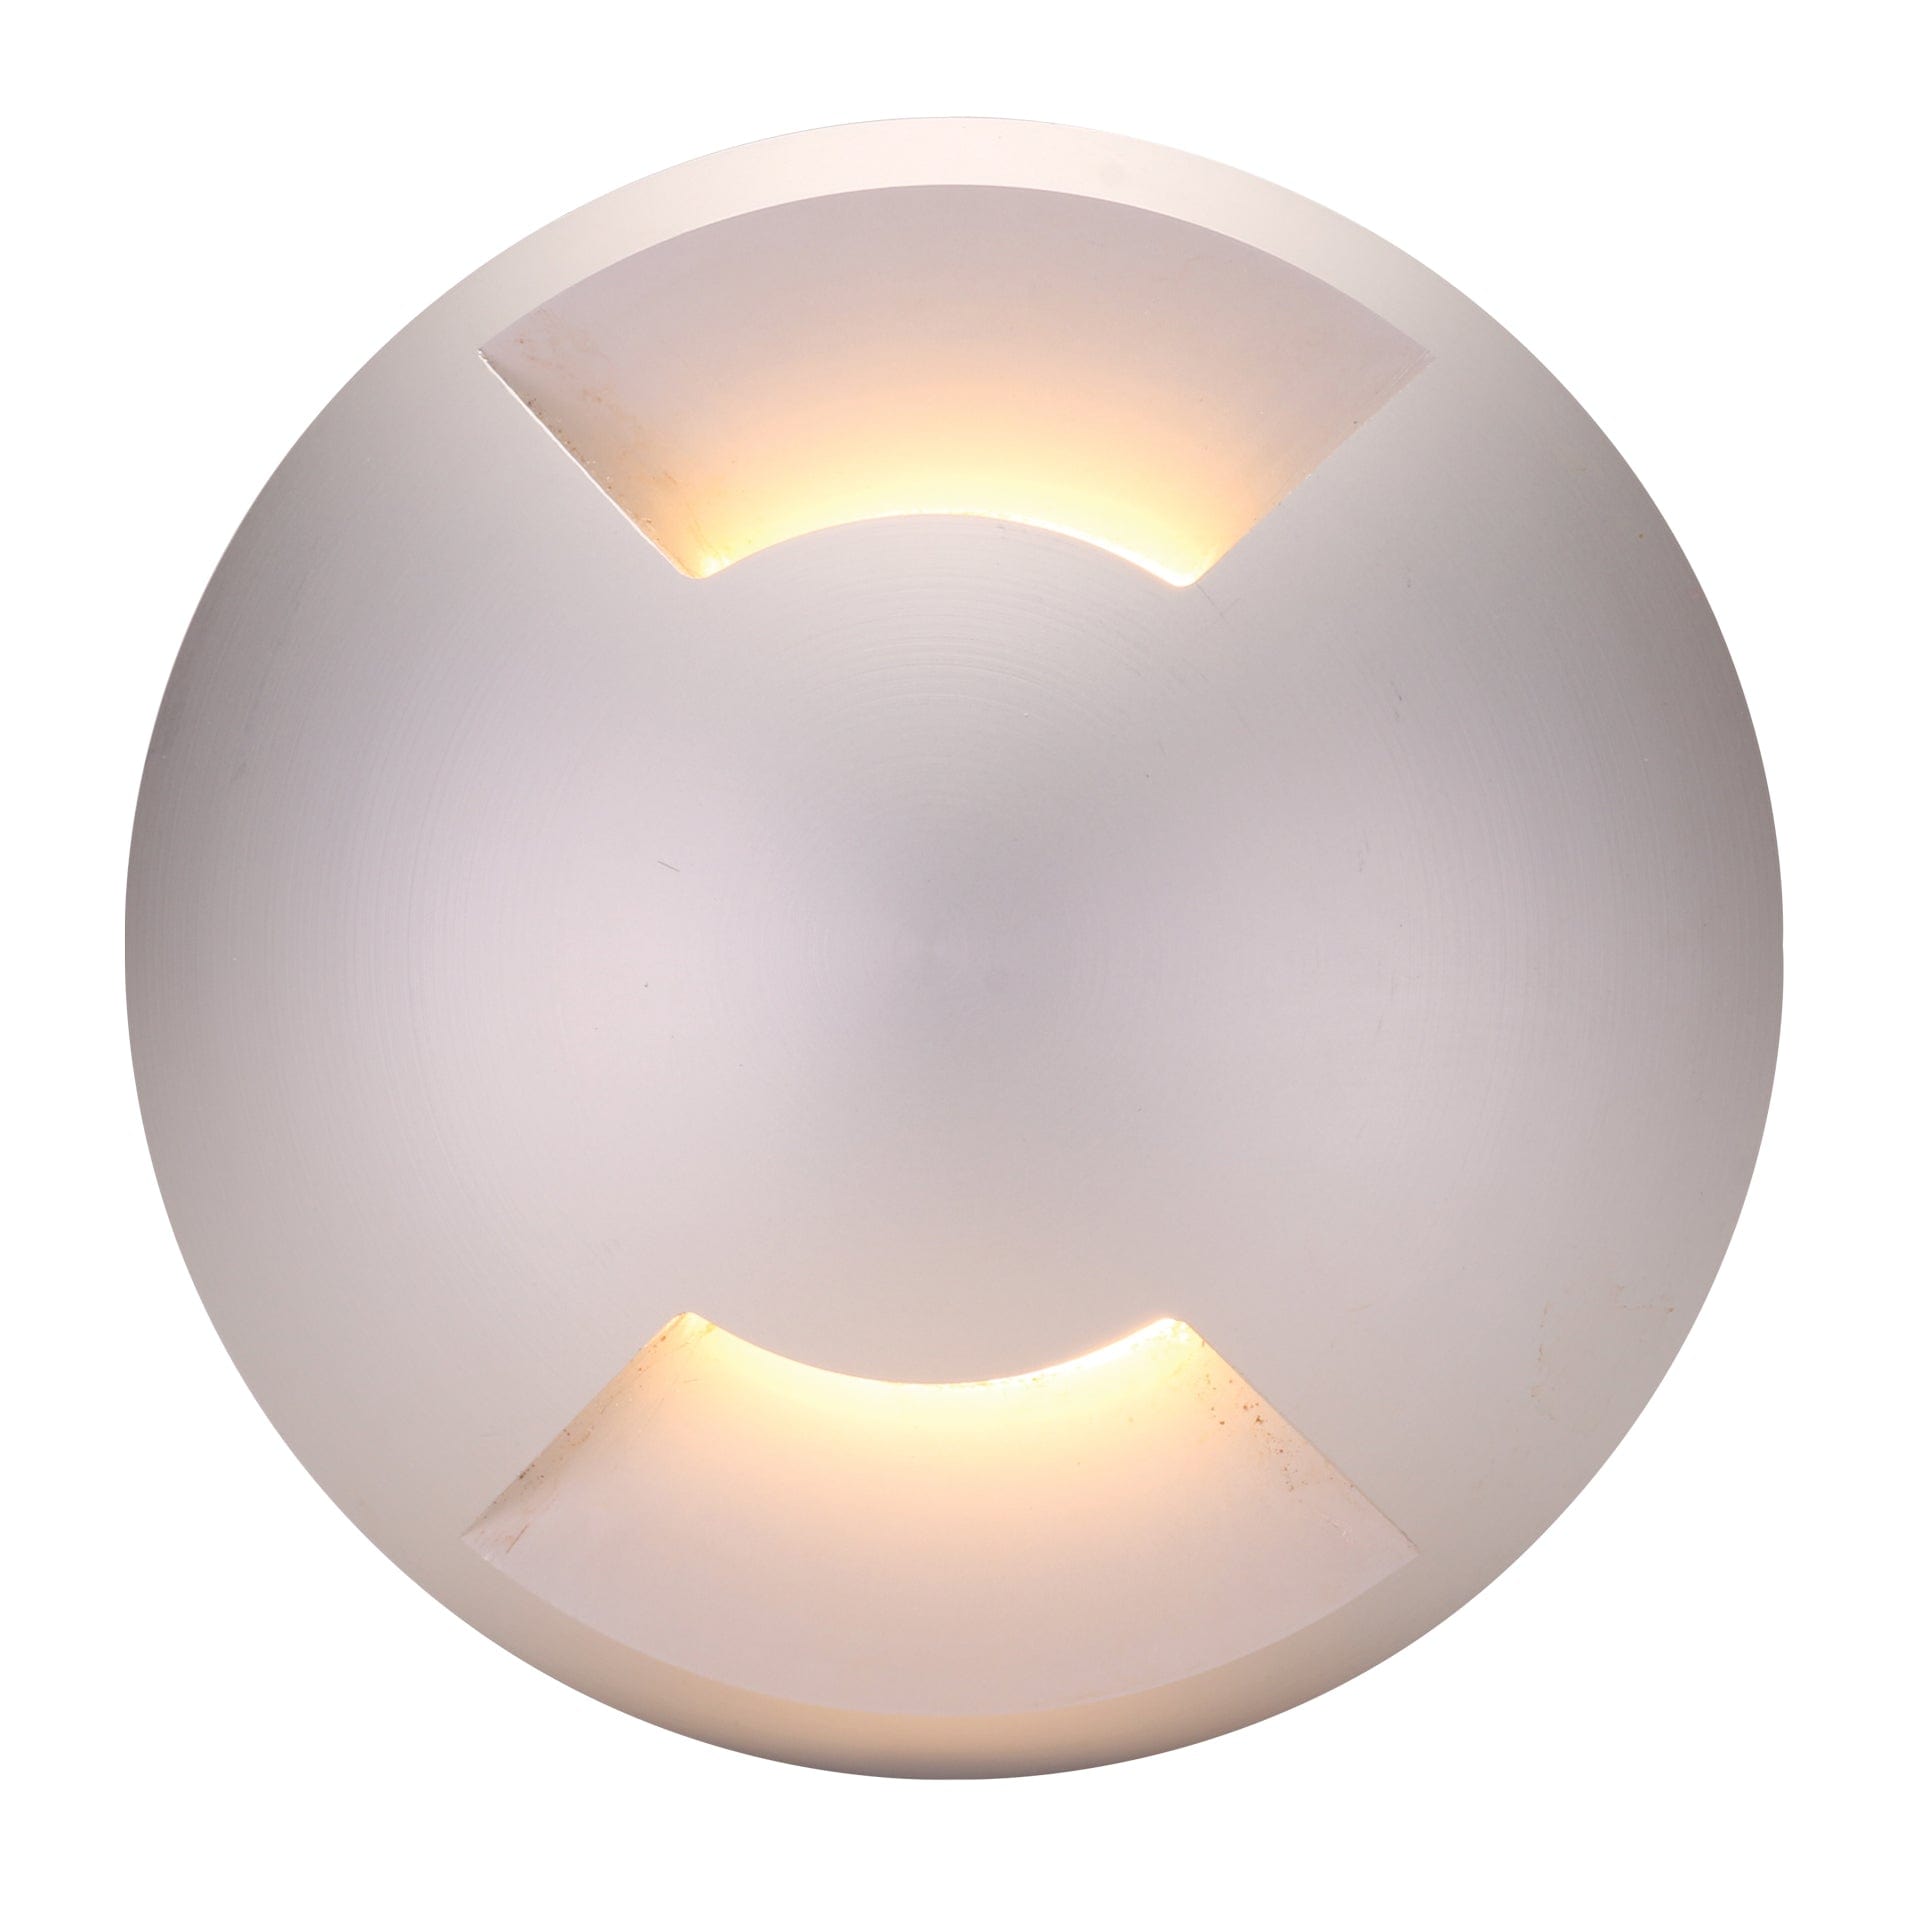 Domus Lighting Step Lights Cover Aluminium / 2 DEKA-COVER Round COVER ONLY Lights-For-You 19430